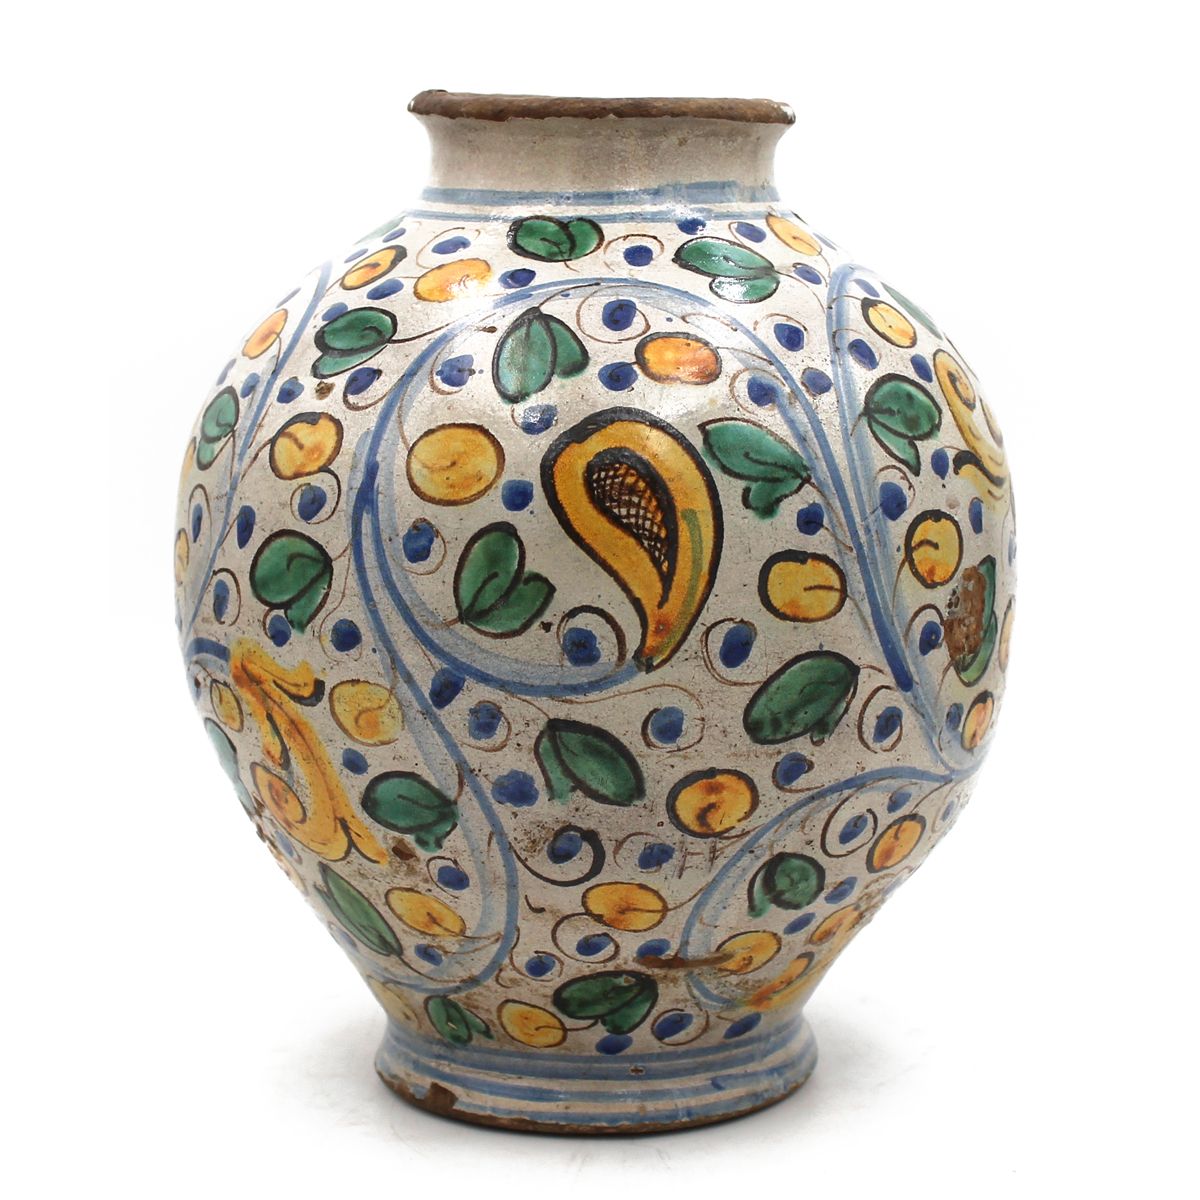 VASO OVOIDALE - VASE Antique majolica decorated with plant motifs in yellow, gre&hellip;